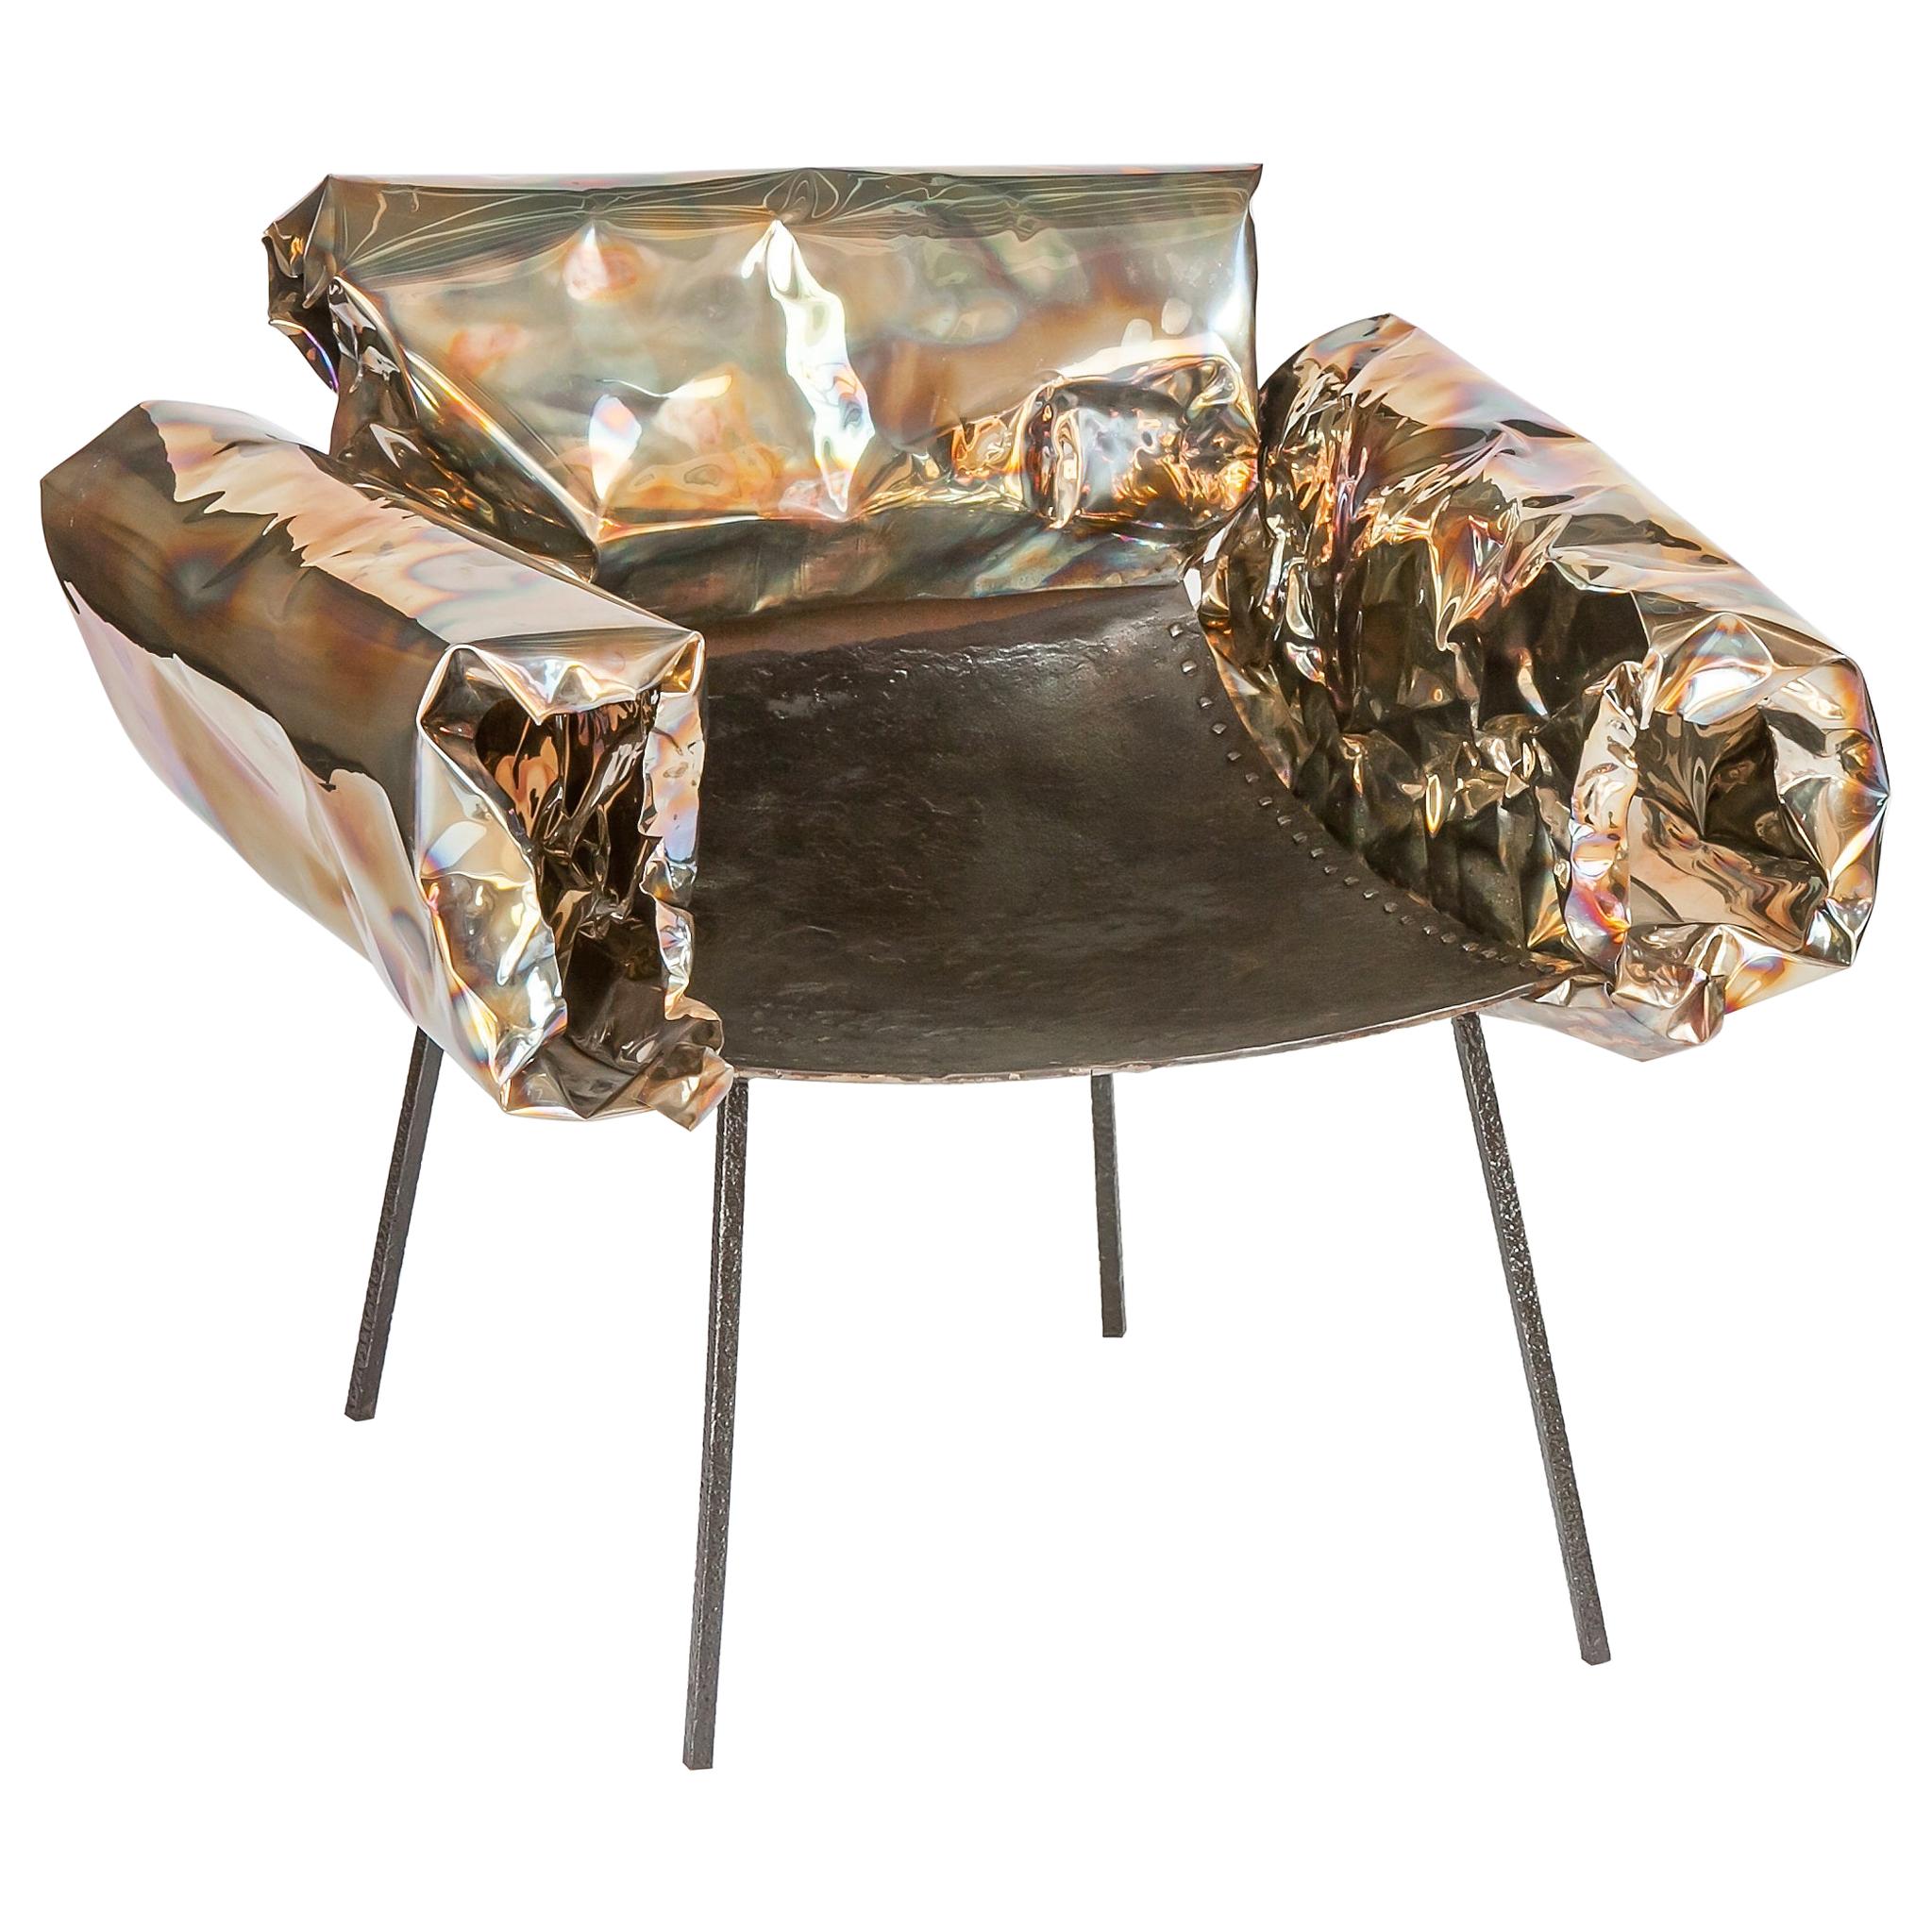 Handmade Stainless Steel Sculptural Armchair by Anadora Lupo For Sale